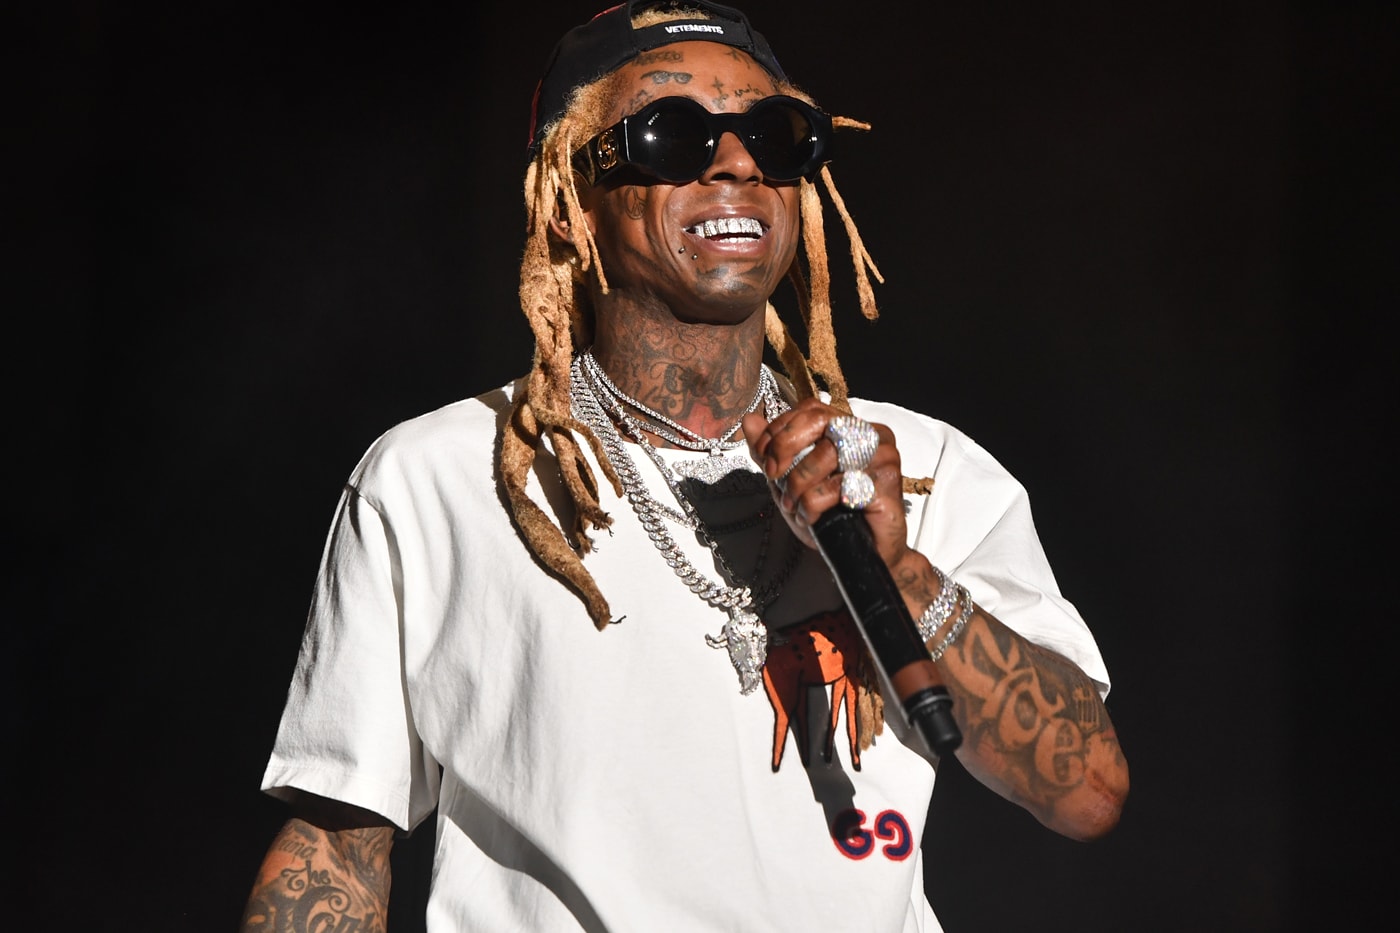 lil-wayne-is-suing-universal-music-group-over-profits-from-discovered